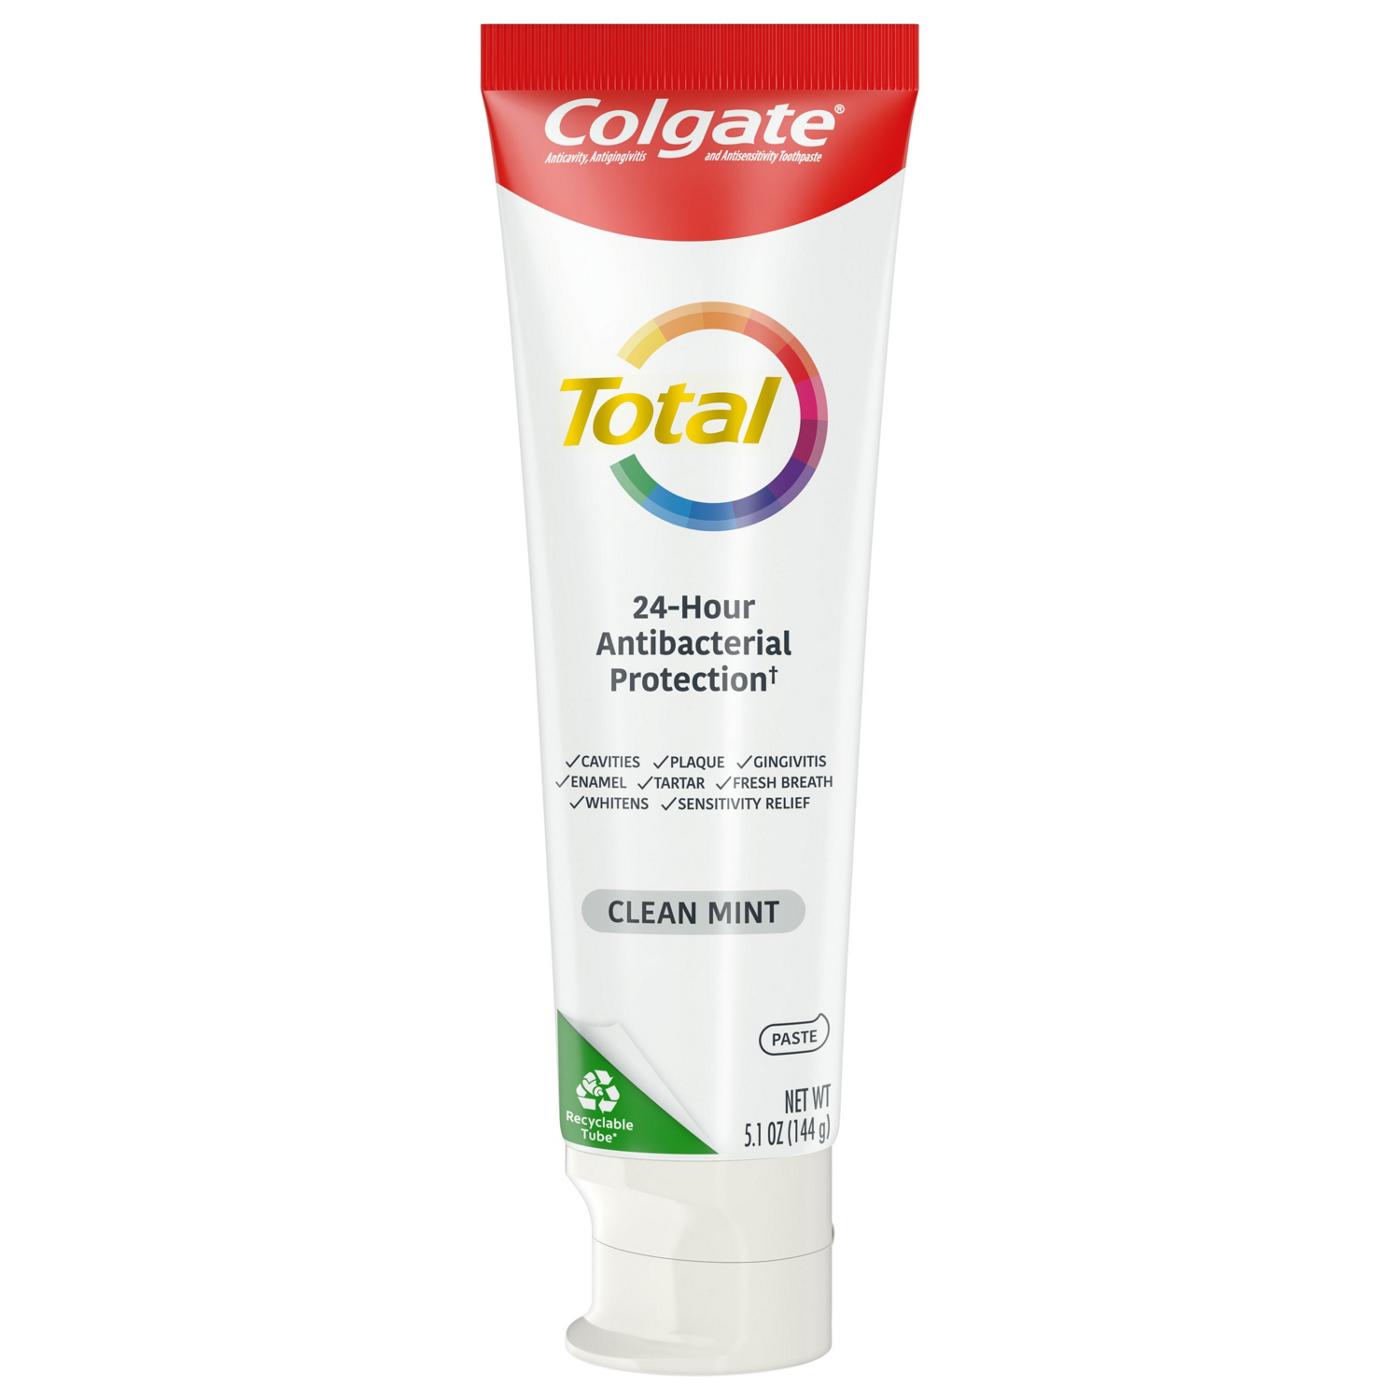 Colgate Total Toothpaste - Clean Mint; image 8 of 13